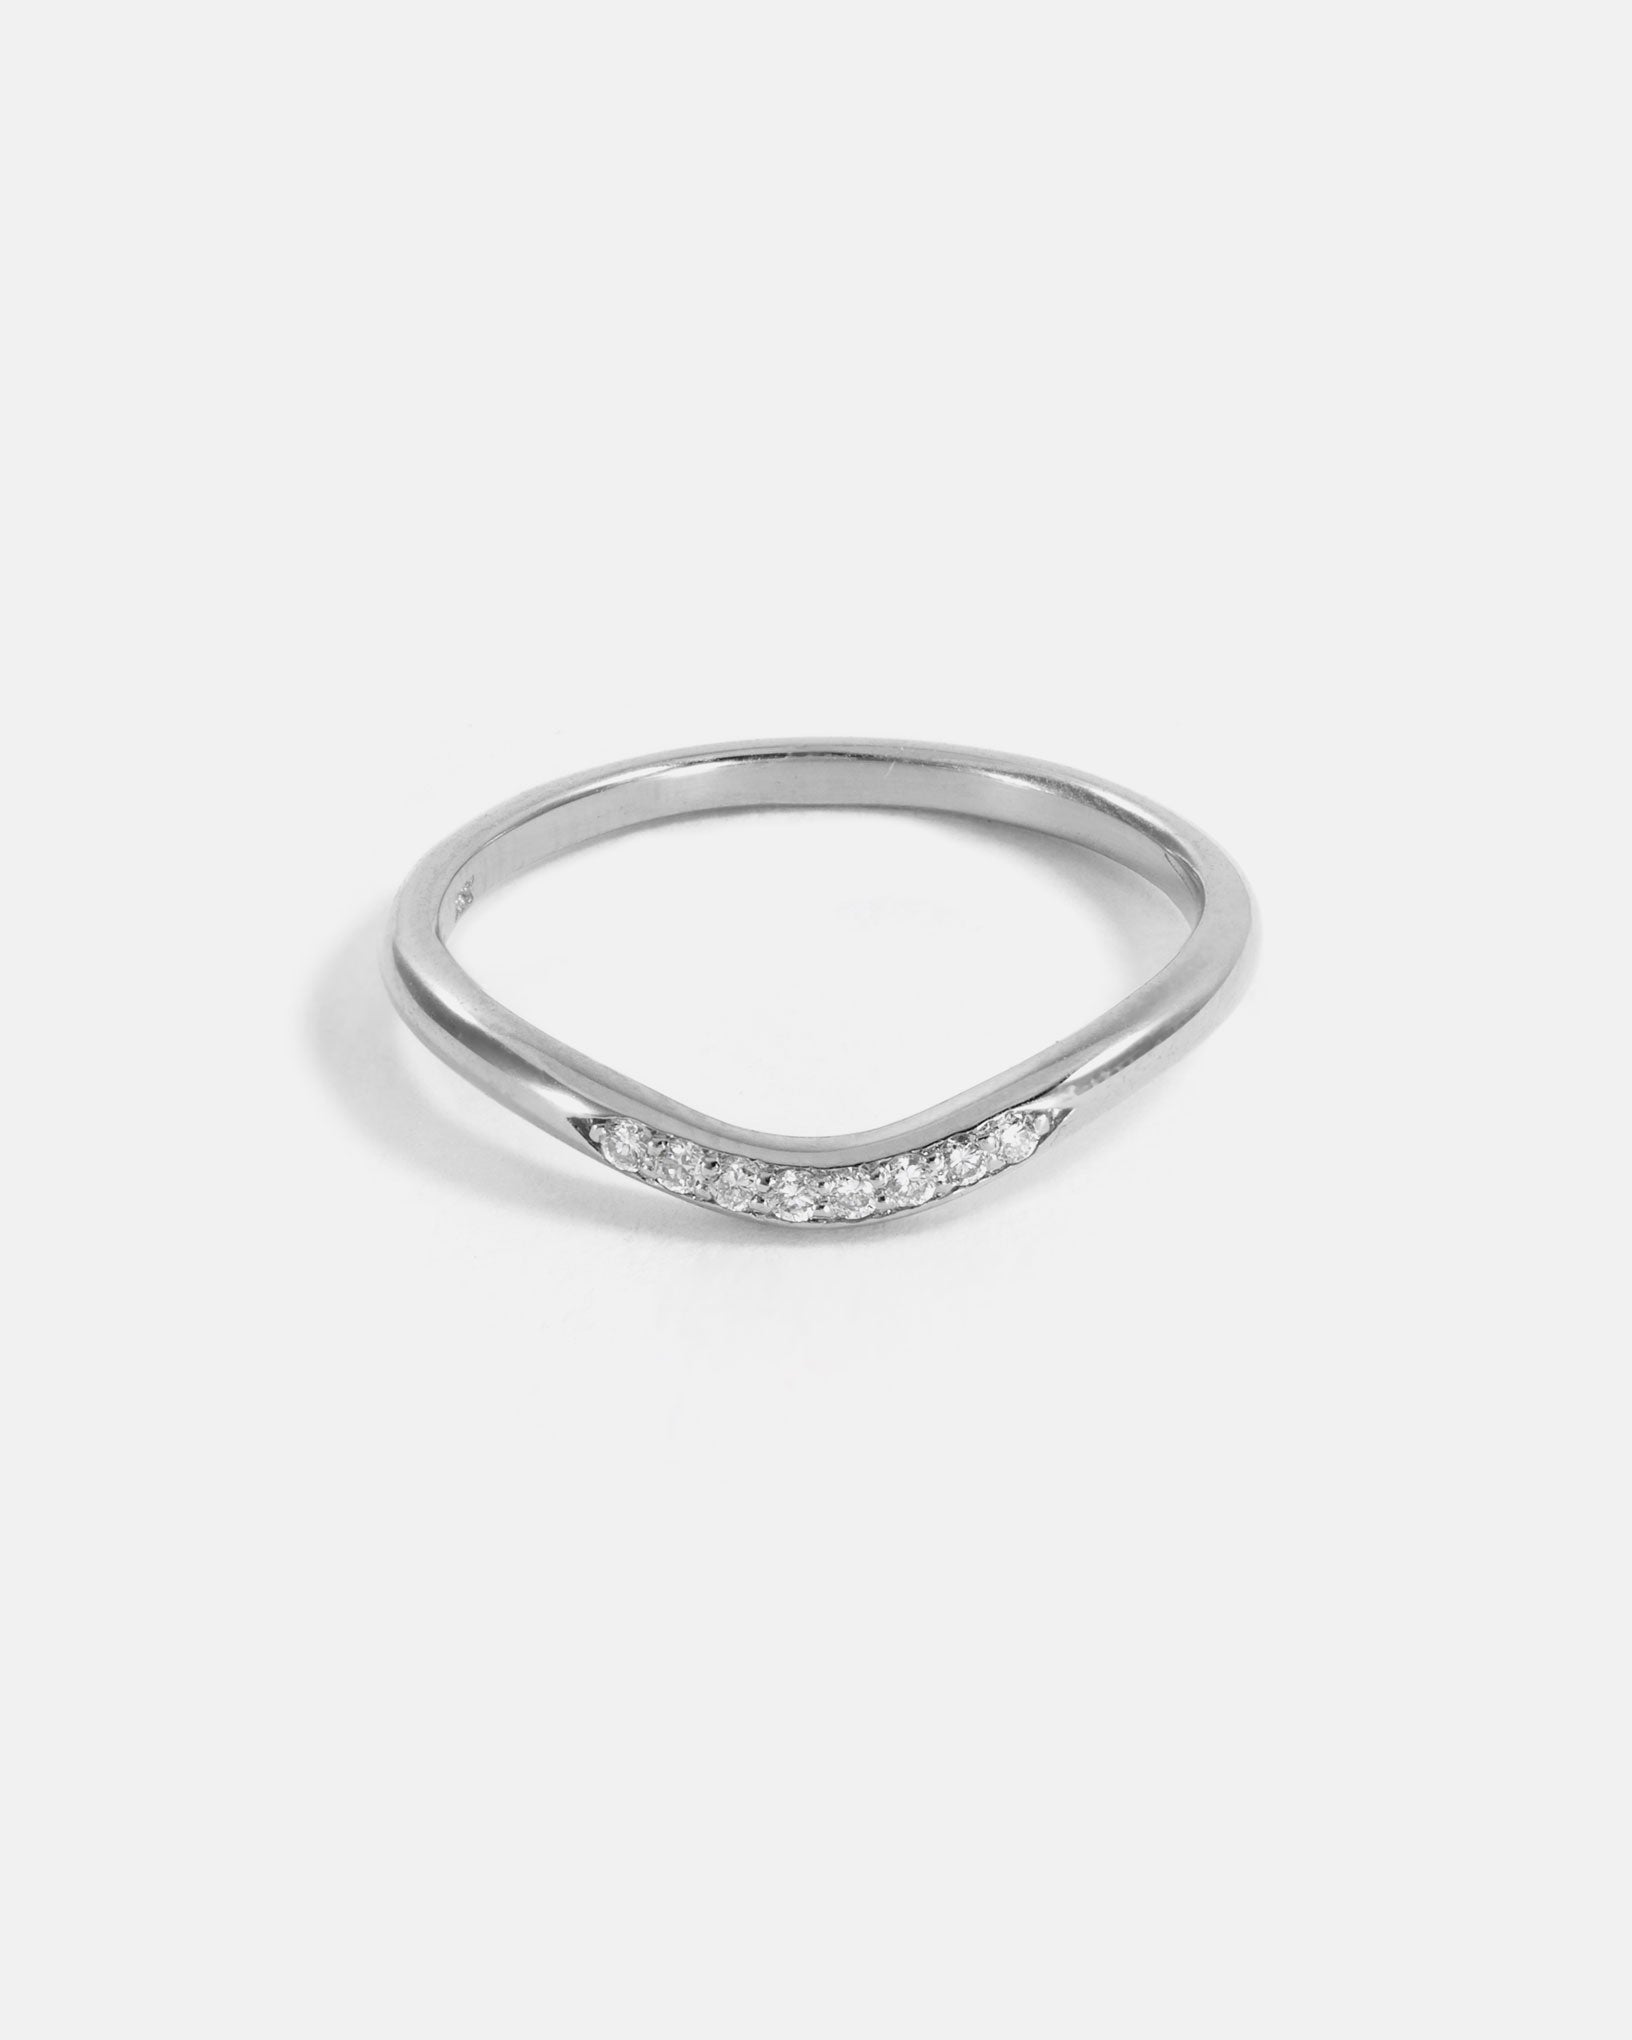 Ellipse Ring and Stratura Wave Band with lab-grown Diamonds